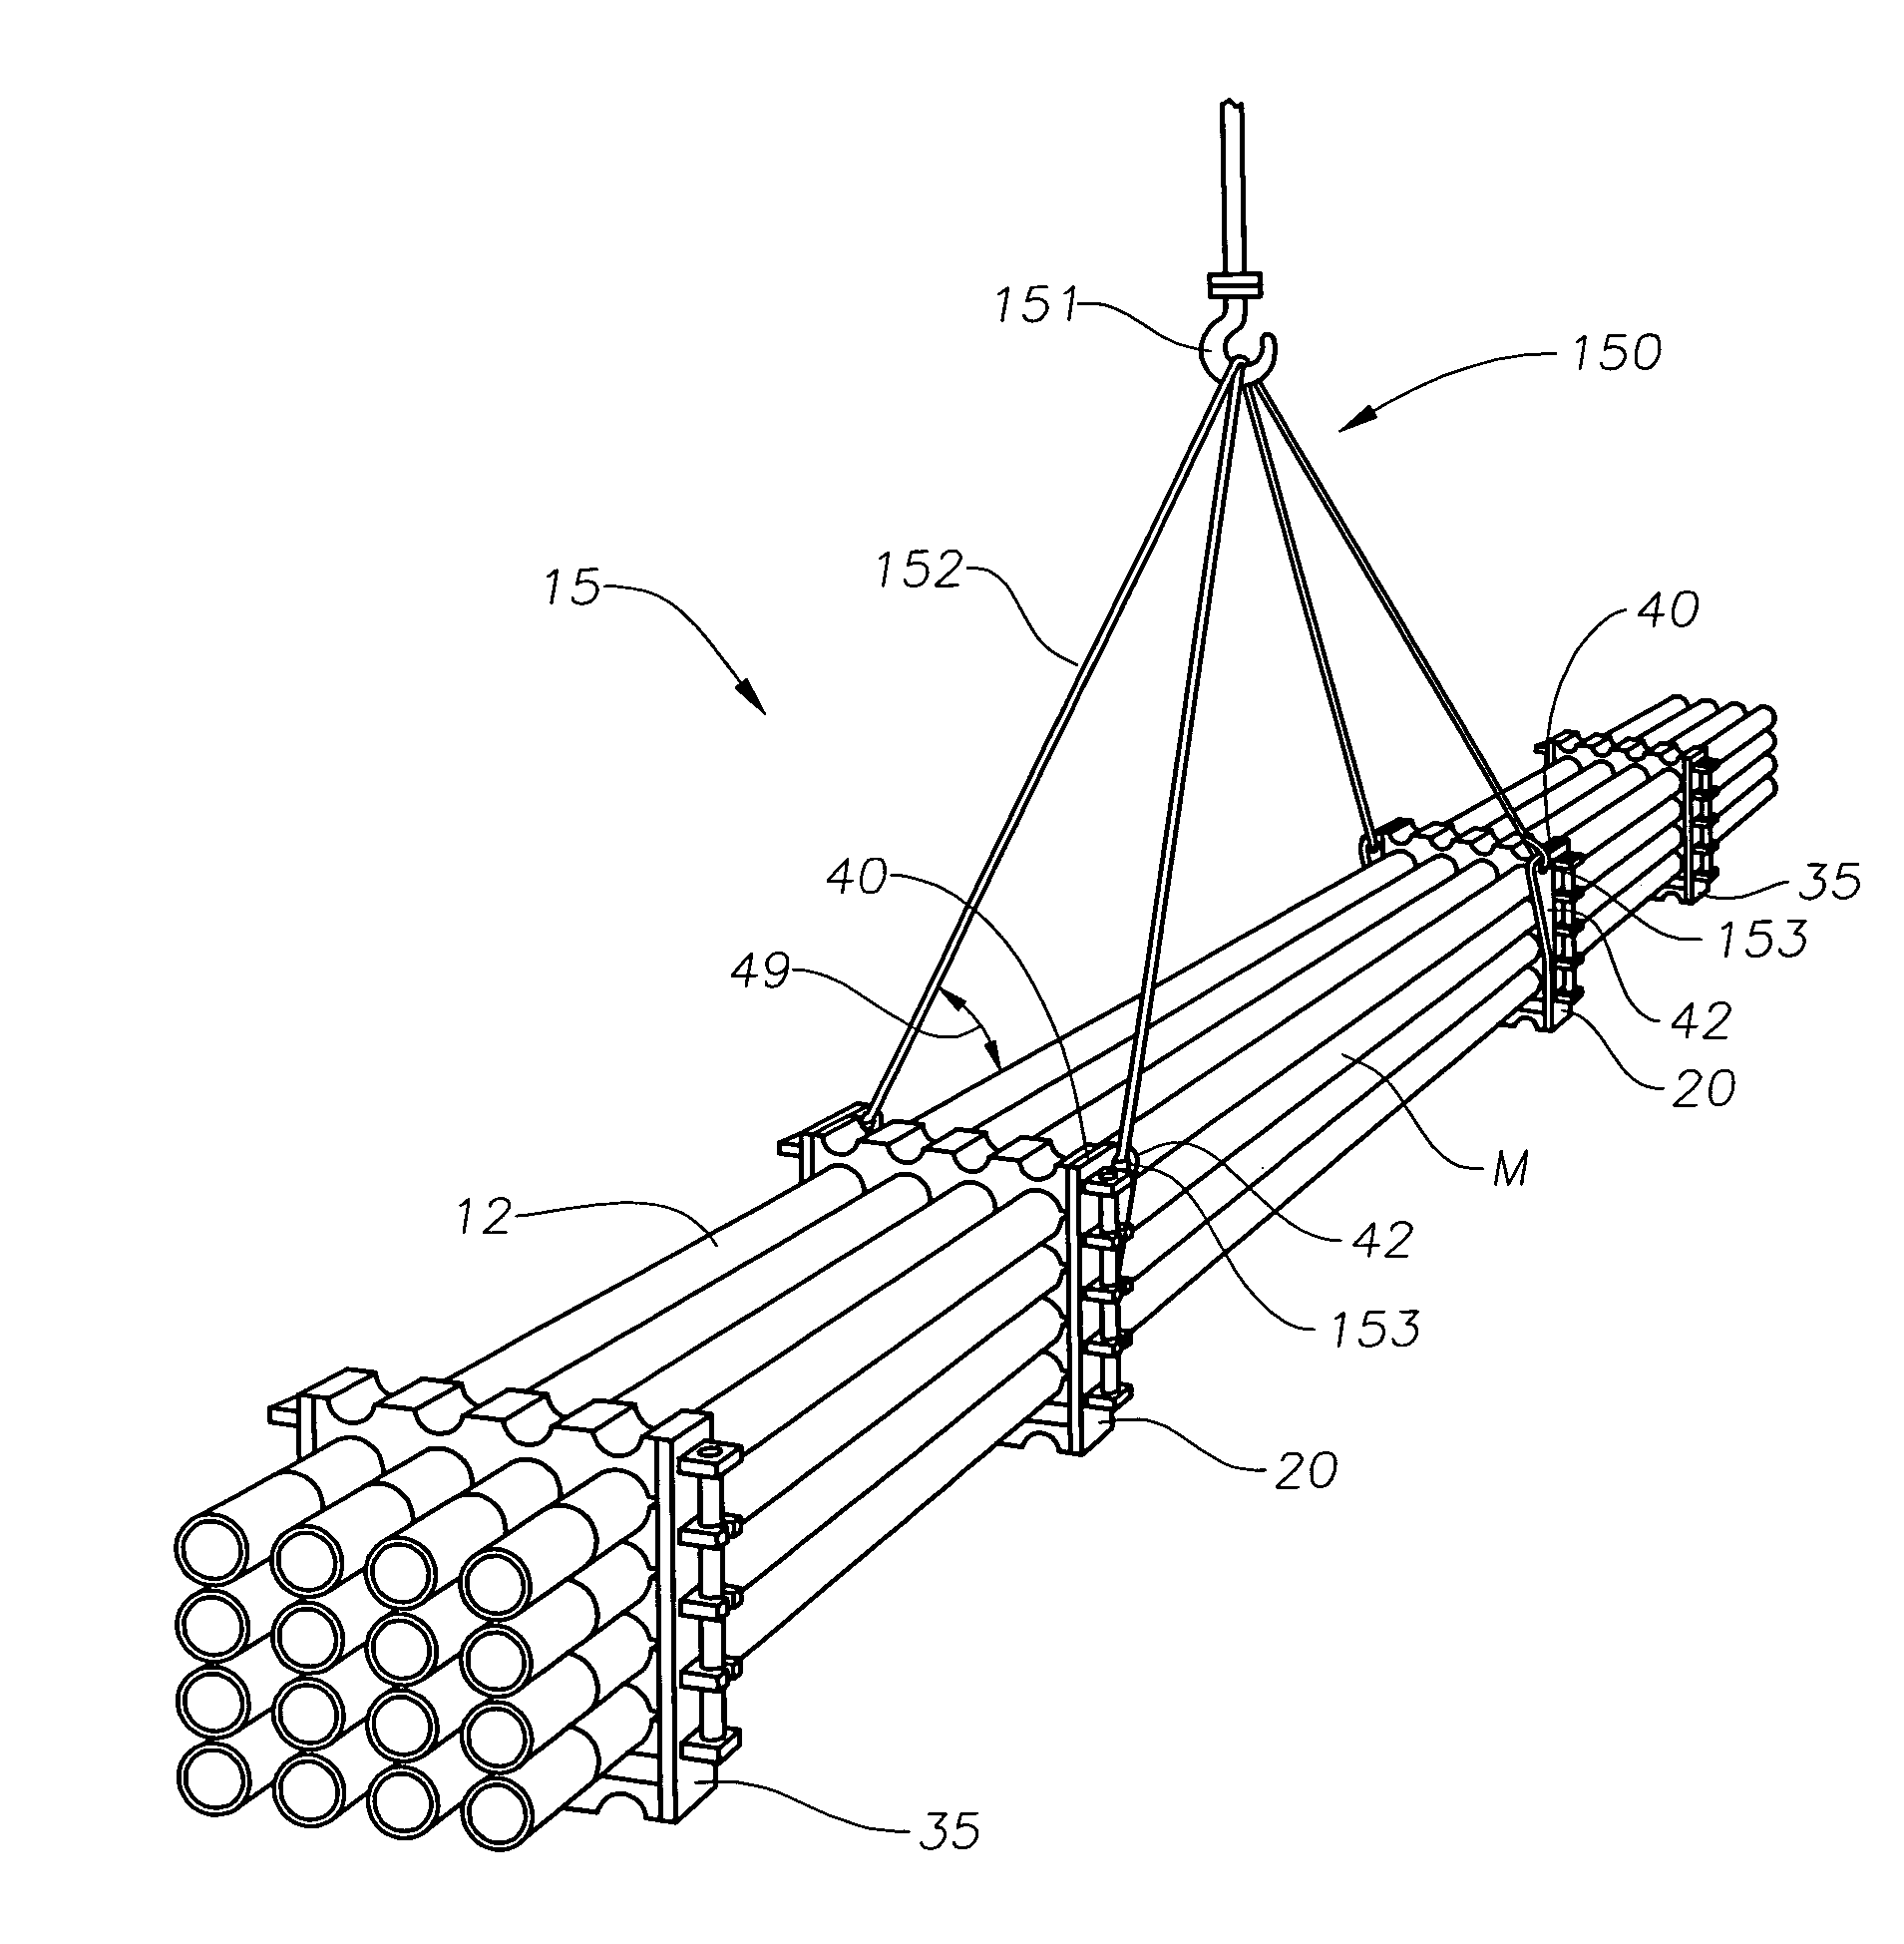 Apparatus for shipping and storing elongated members